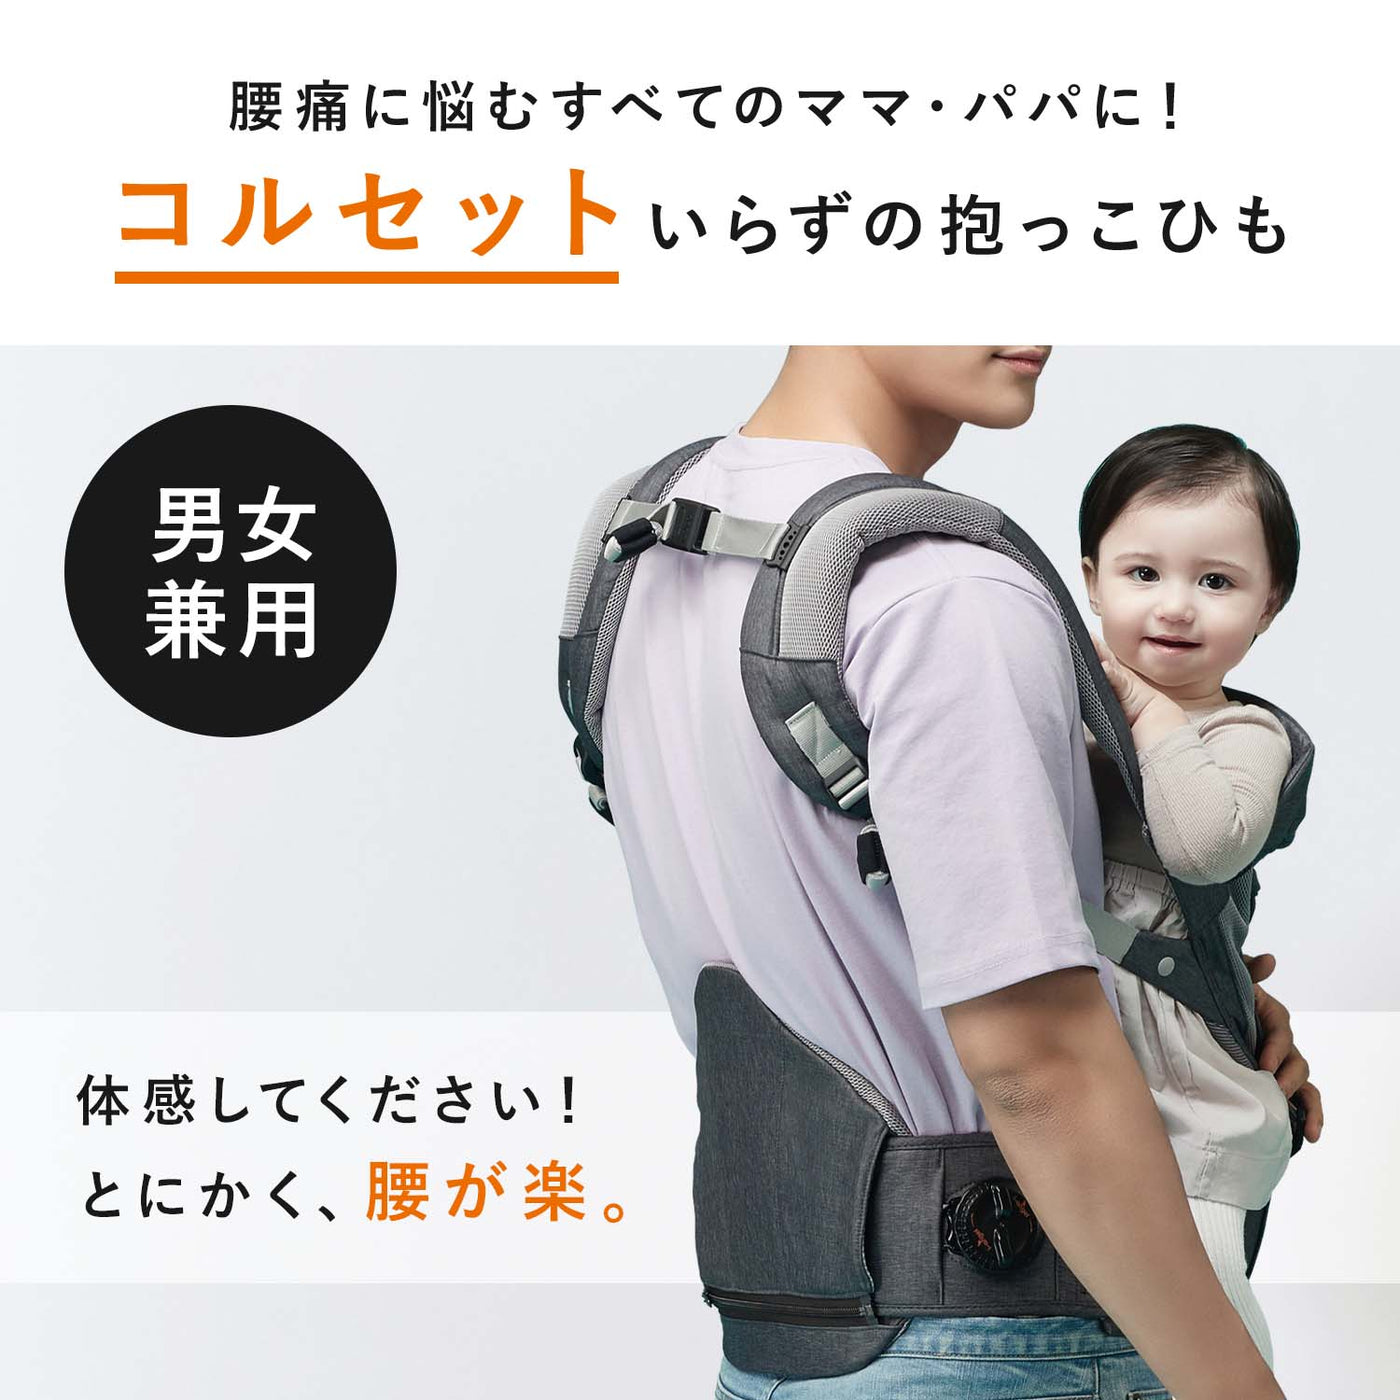 2WAYヒップシートキャリア Dr.Dial Hipseat Carrier | i-angel（アイ